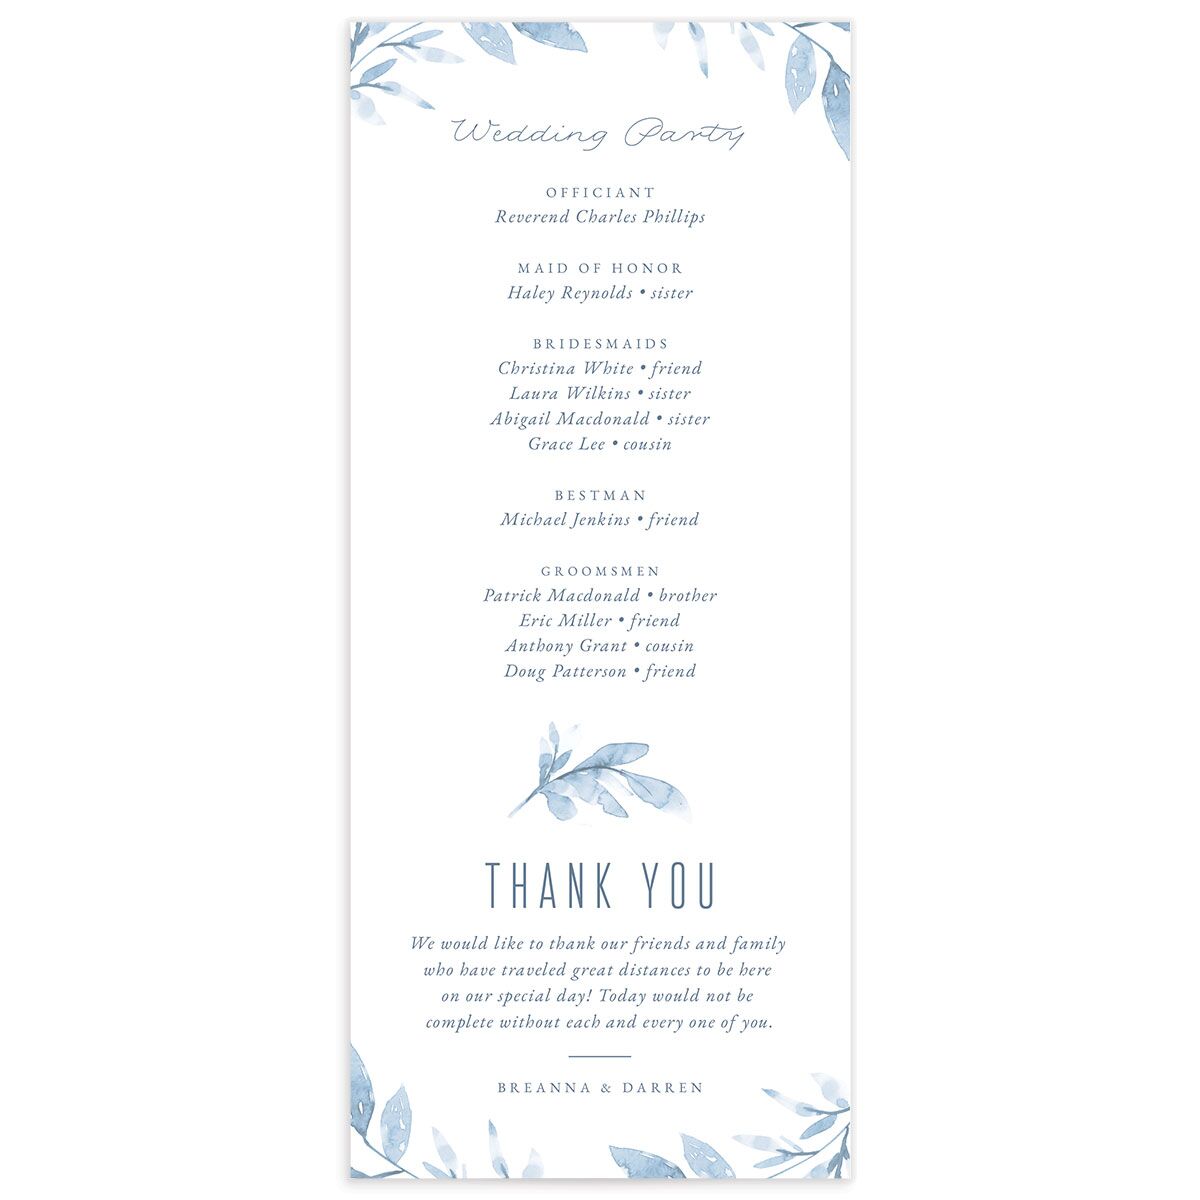 Ethereal Branches Wedding Programs back in Dusty Blue